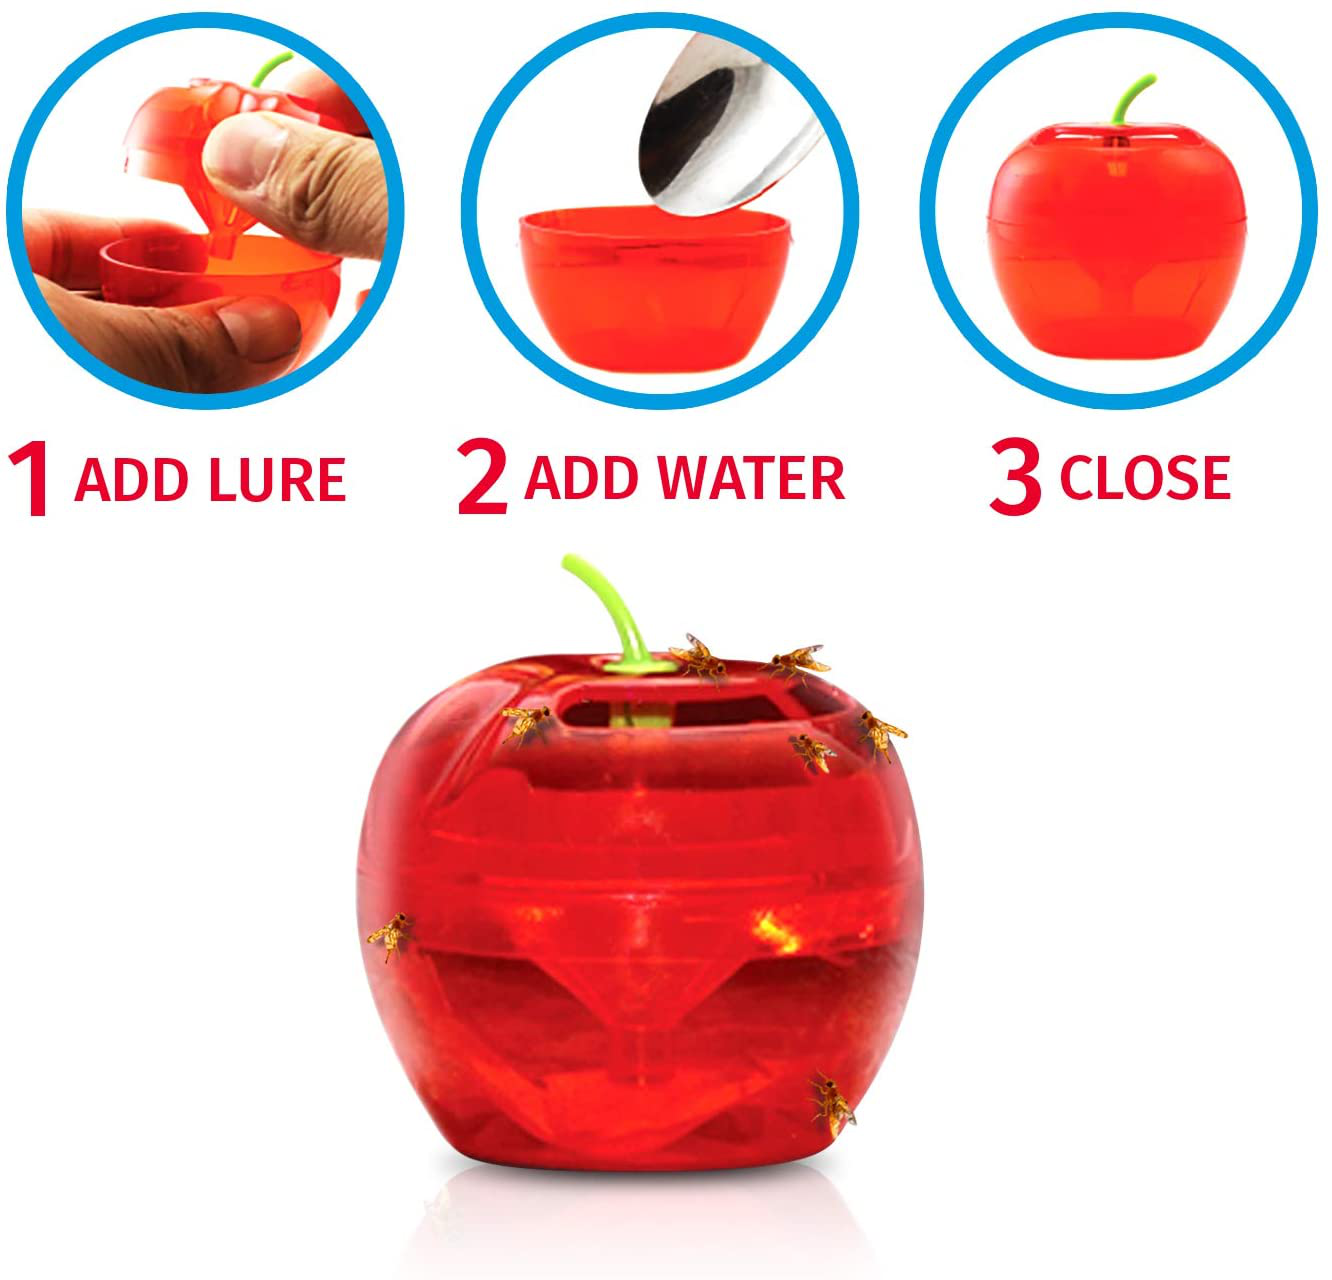 Raid Fruit Fly Trap (2 Pack Bundle) | 2 Lures + 2 Refills | Effective Fly Trap for Indoor Use | Fly Catcher and Gnat Trap for Kitchen & Dining Areas | Easy to Use & Safe Food-Based Lure Fly Catcher